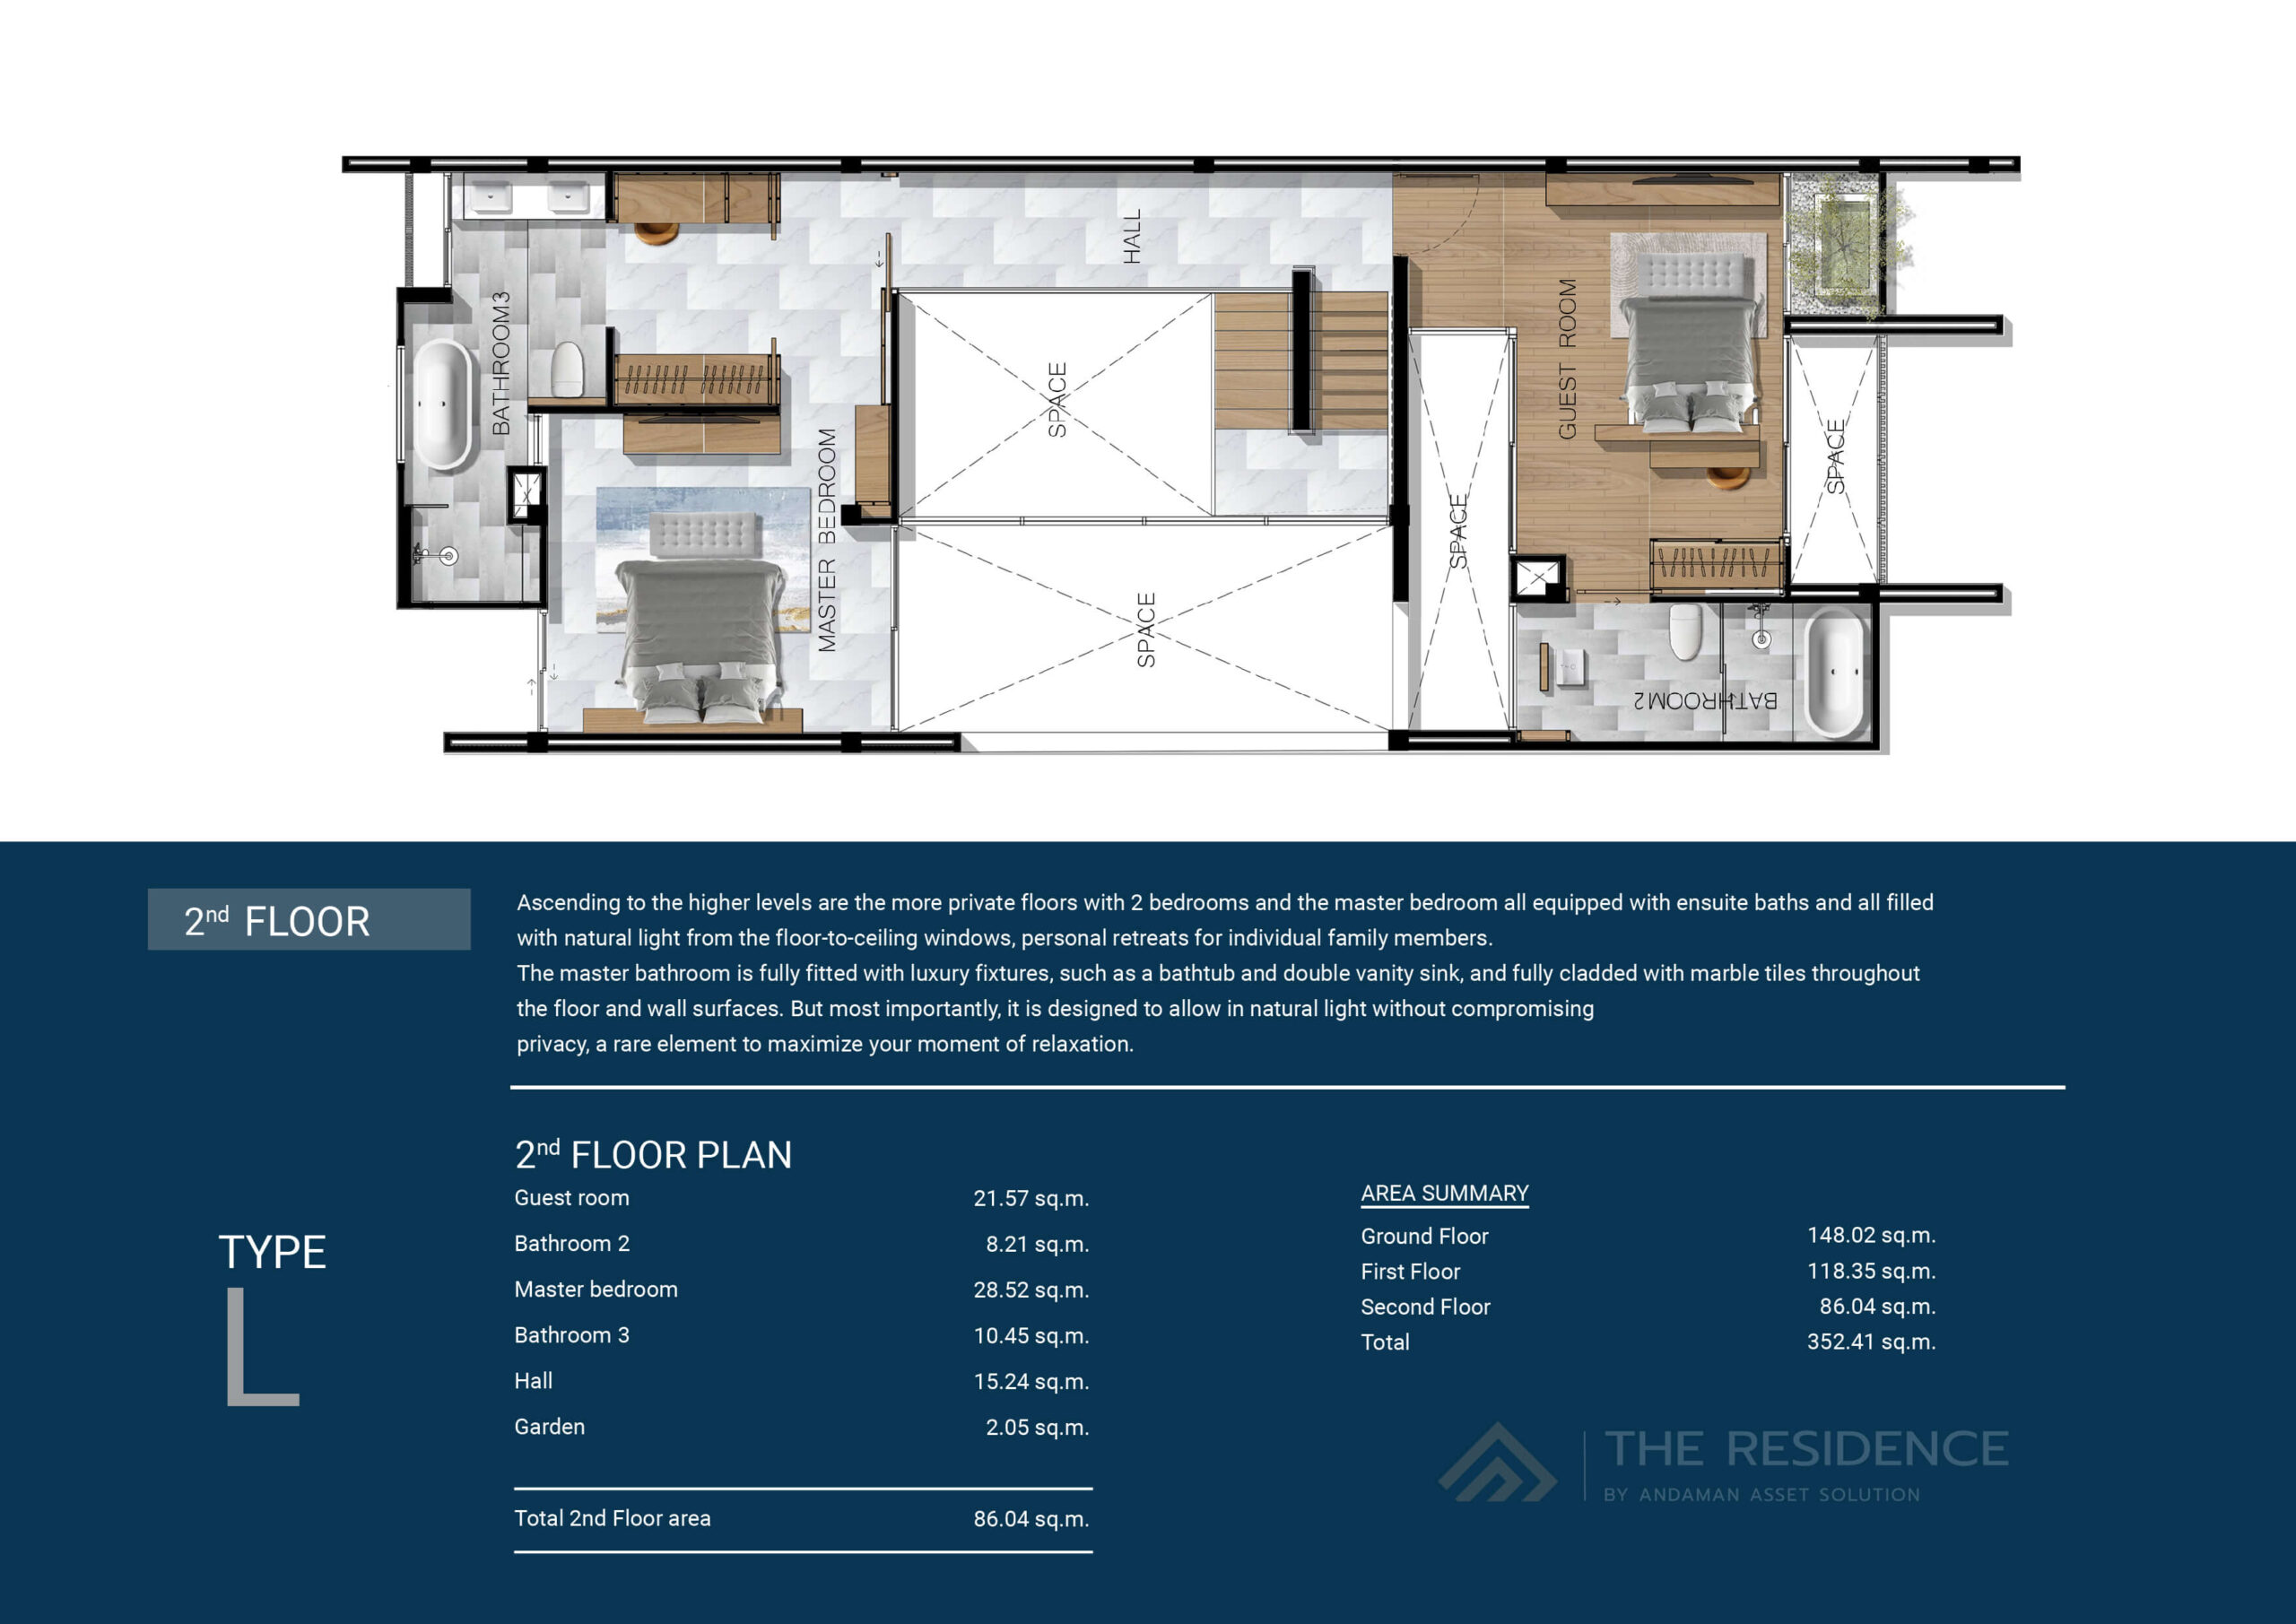 the-residence-plan-type-L-second-floor-scaled-1